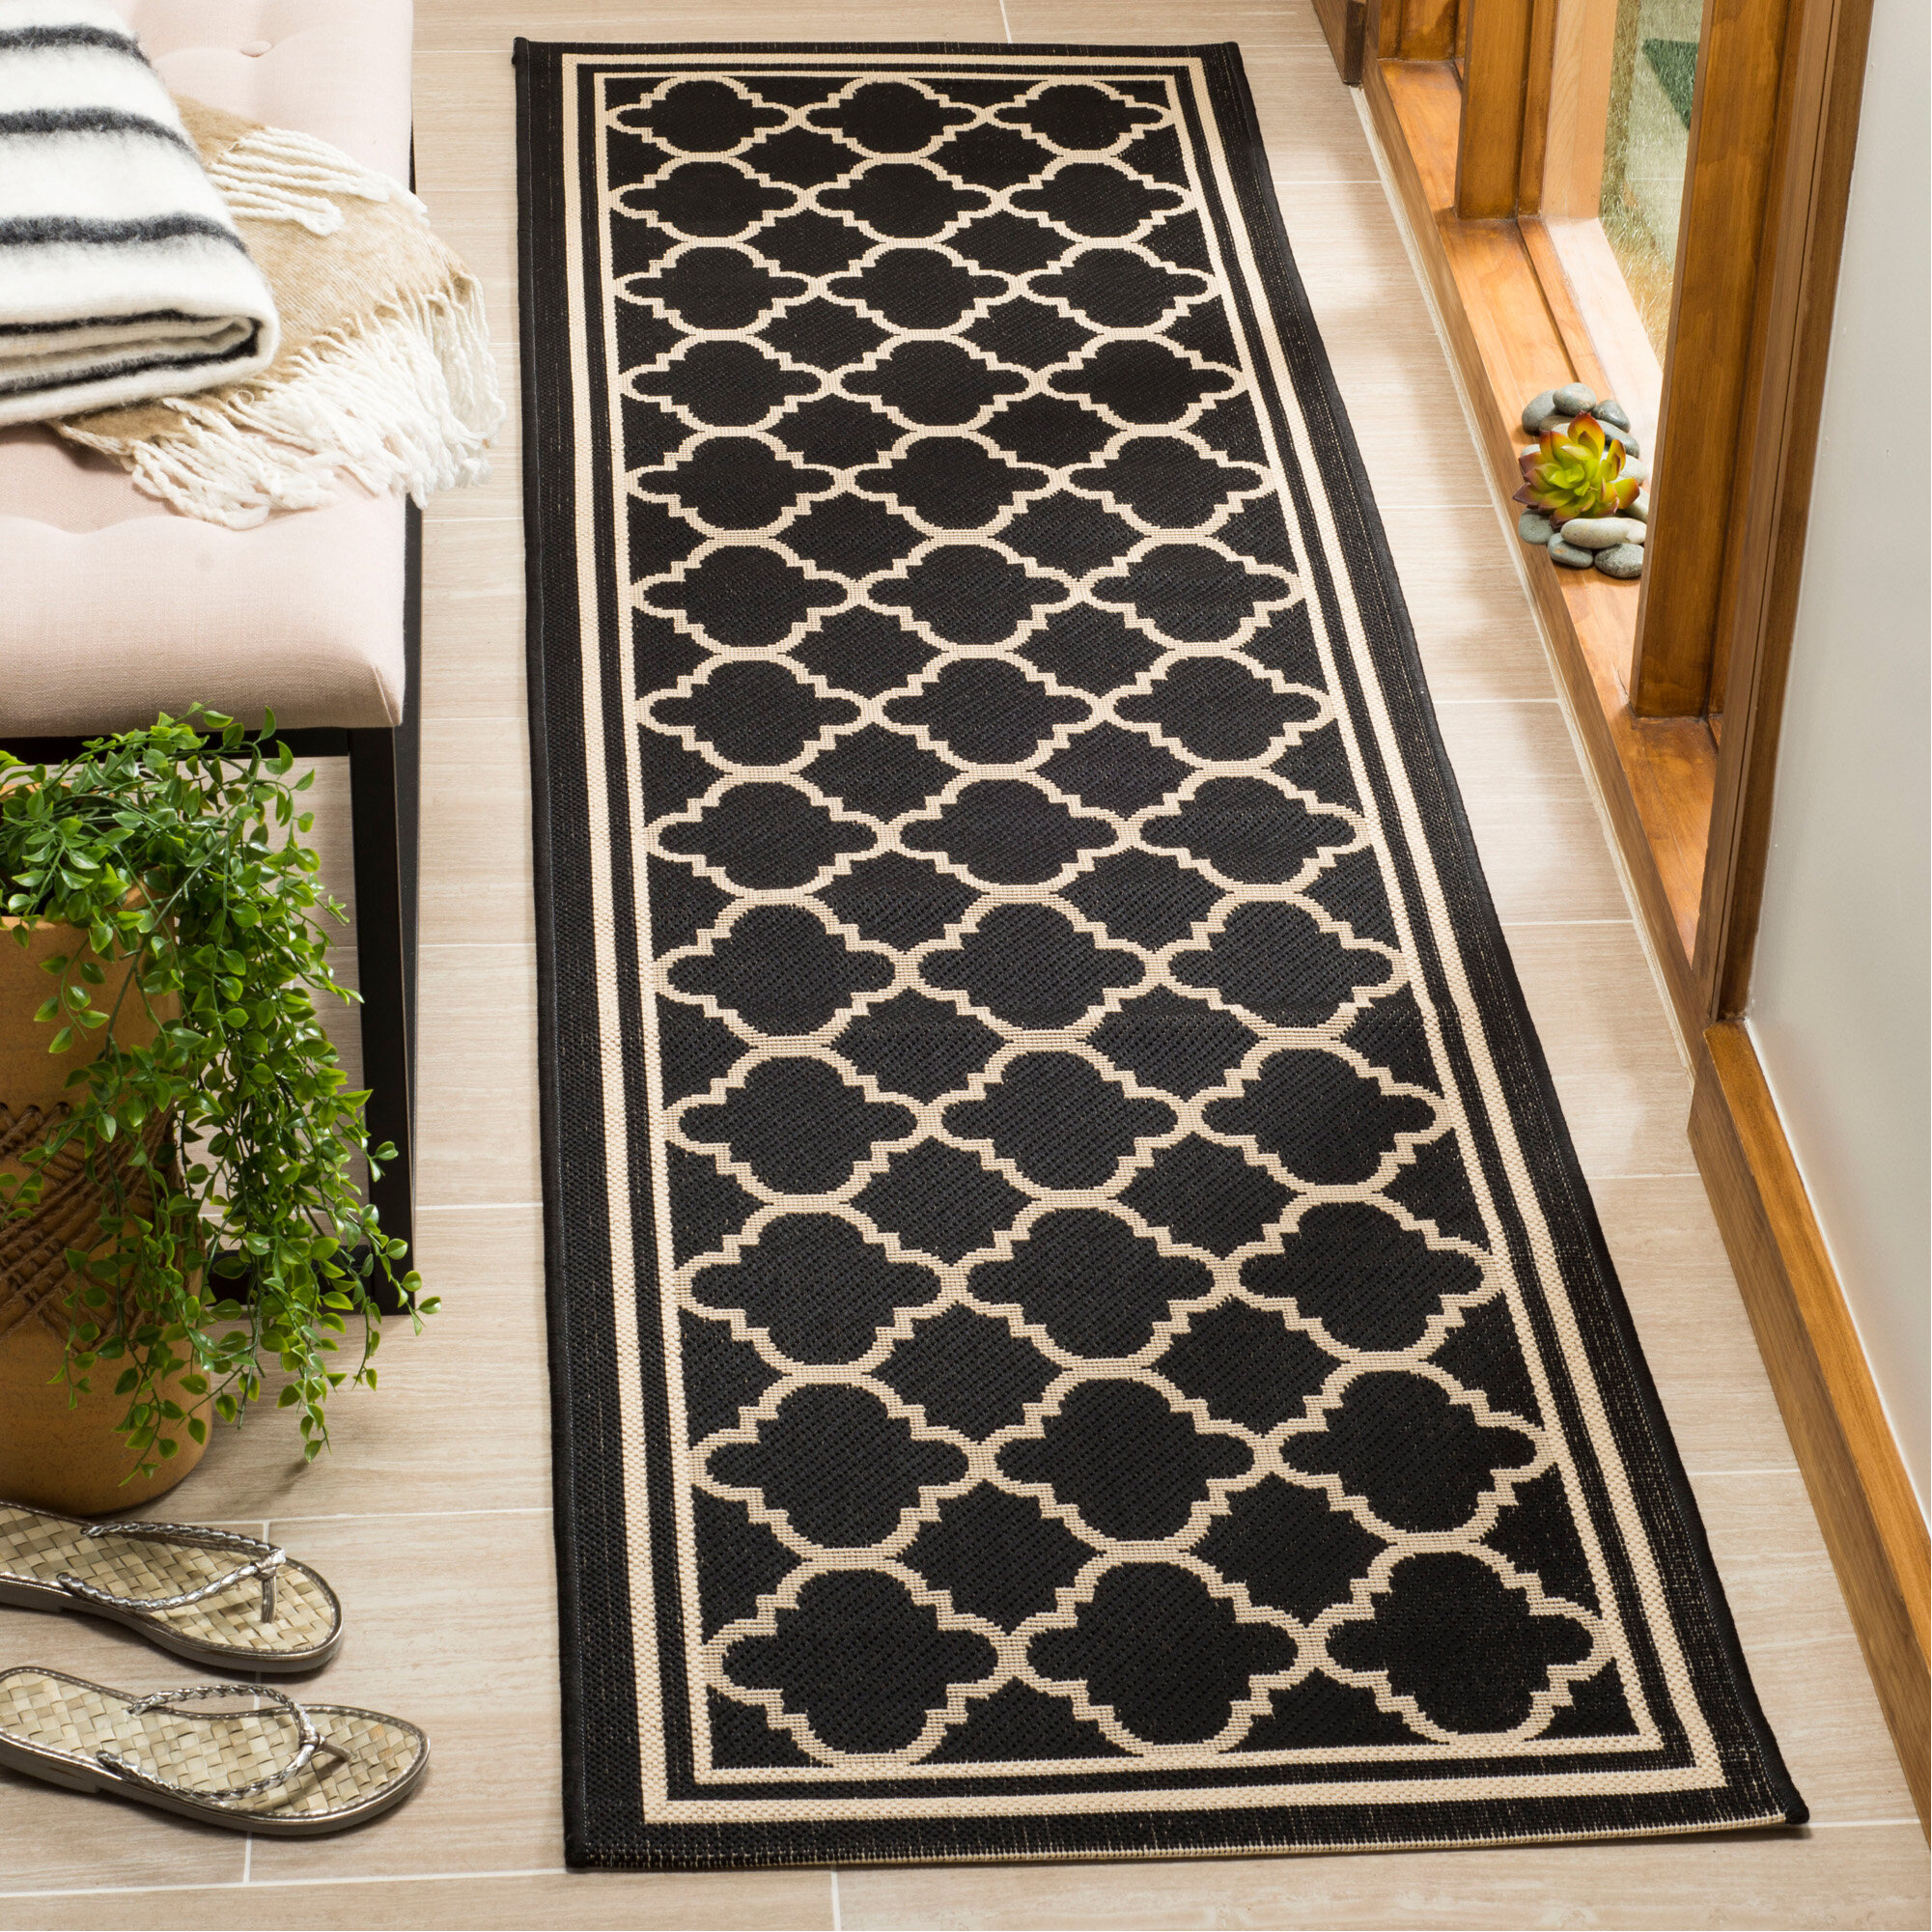 Soft Black & White Modern Hallway Runners Corridor Stairs Non-Shed Floor Rugs 